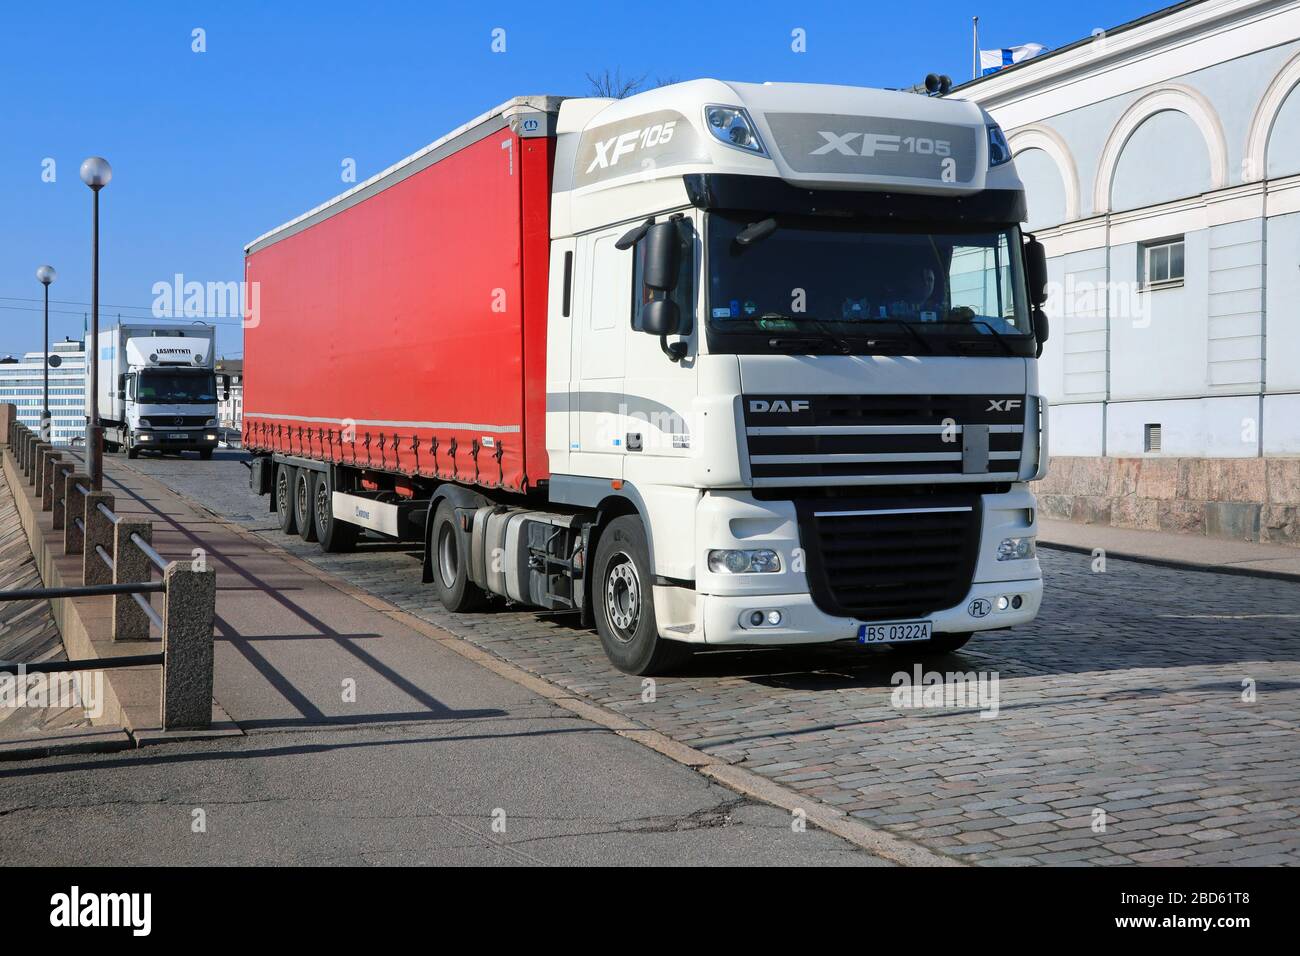 https://c8.alamy.com/comp/2BD61T8/white-daf-xf-105460-semi-trailer-driving-on-cobbled-helsinki-street-after-arrival-in-port-of-helsinki-finland-on-sunny-day-of-spring-april-7-2020-2BD61T8.jpg